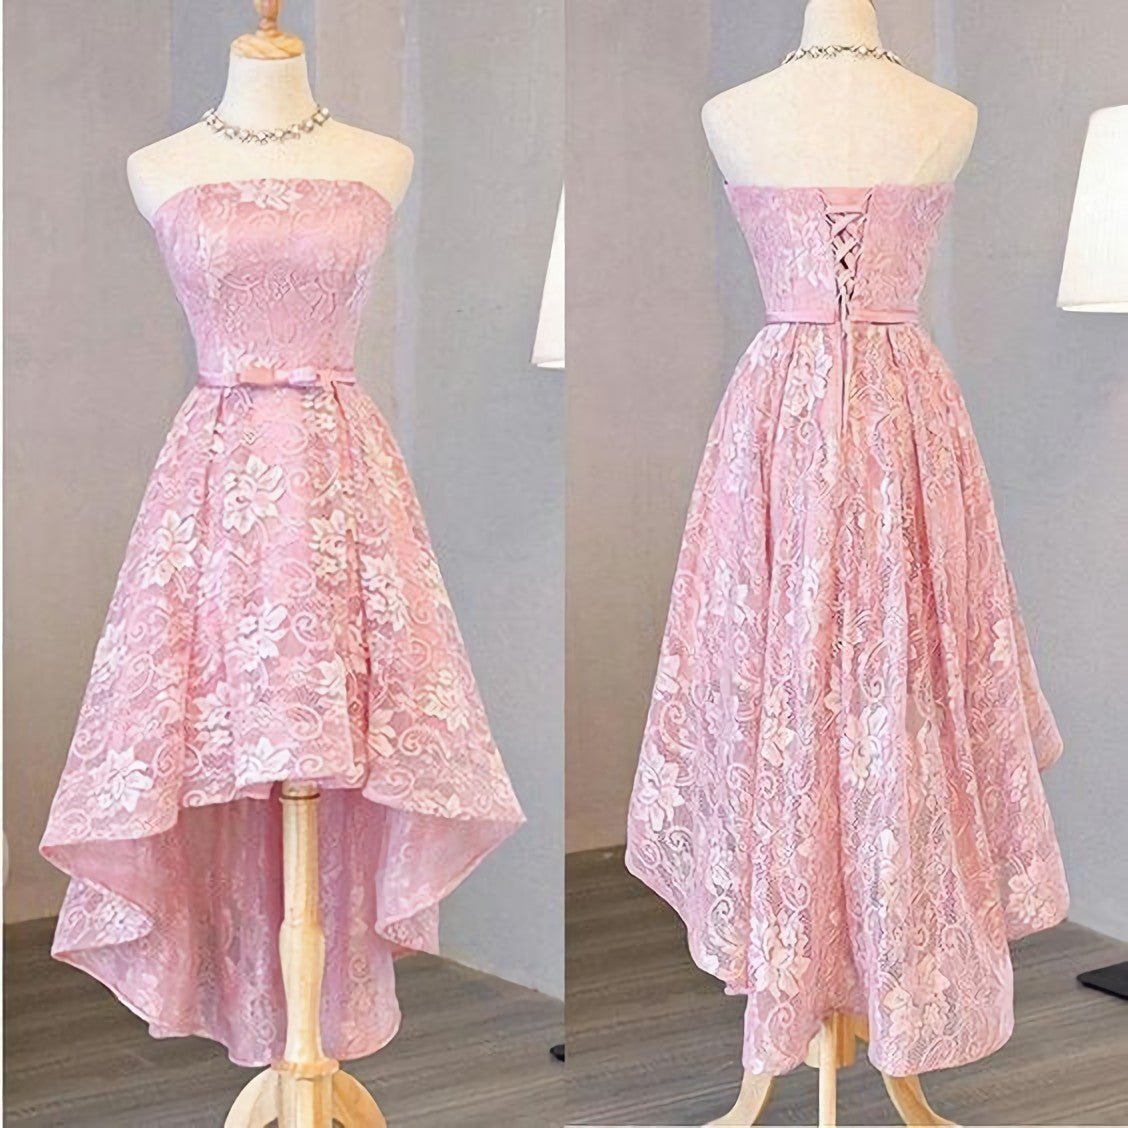 Nice Pink High Low Lace Dress, Pink High Low Dress, Lace Dress, Corset Homecoming Dress outfit, Prom Dresses Country